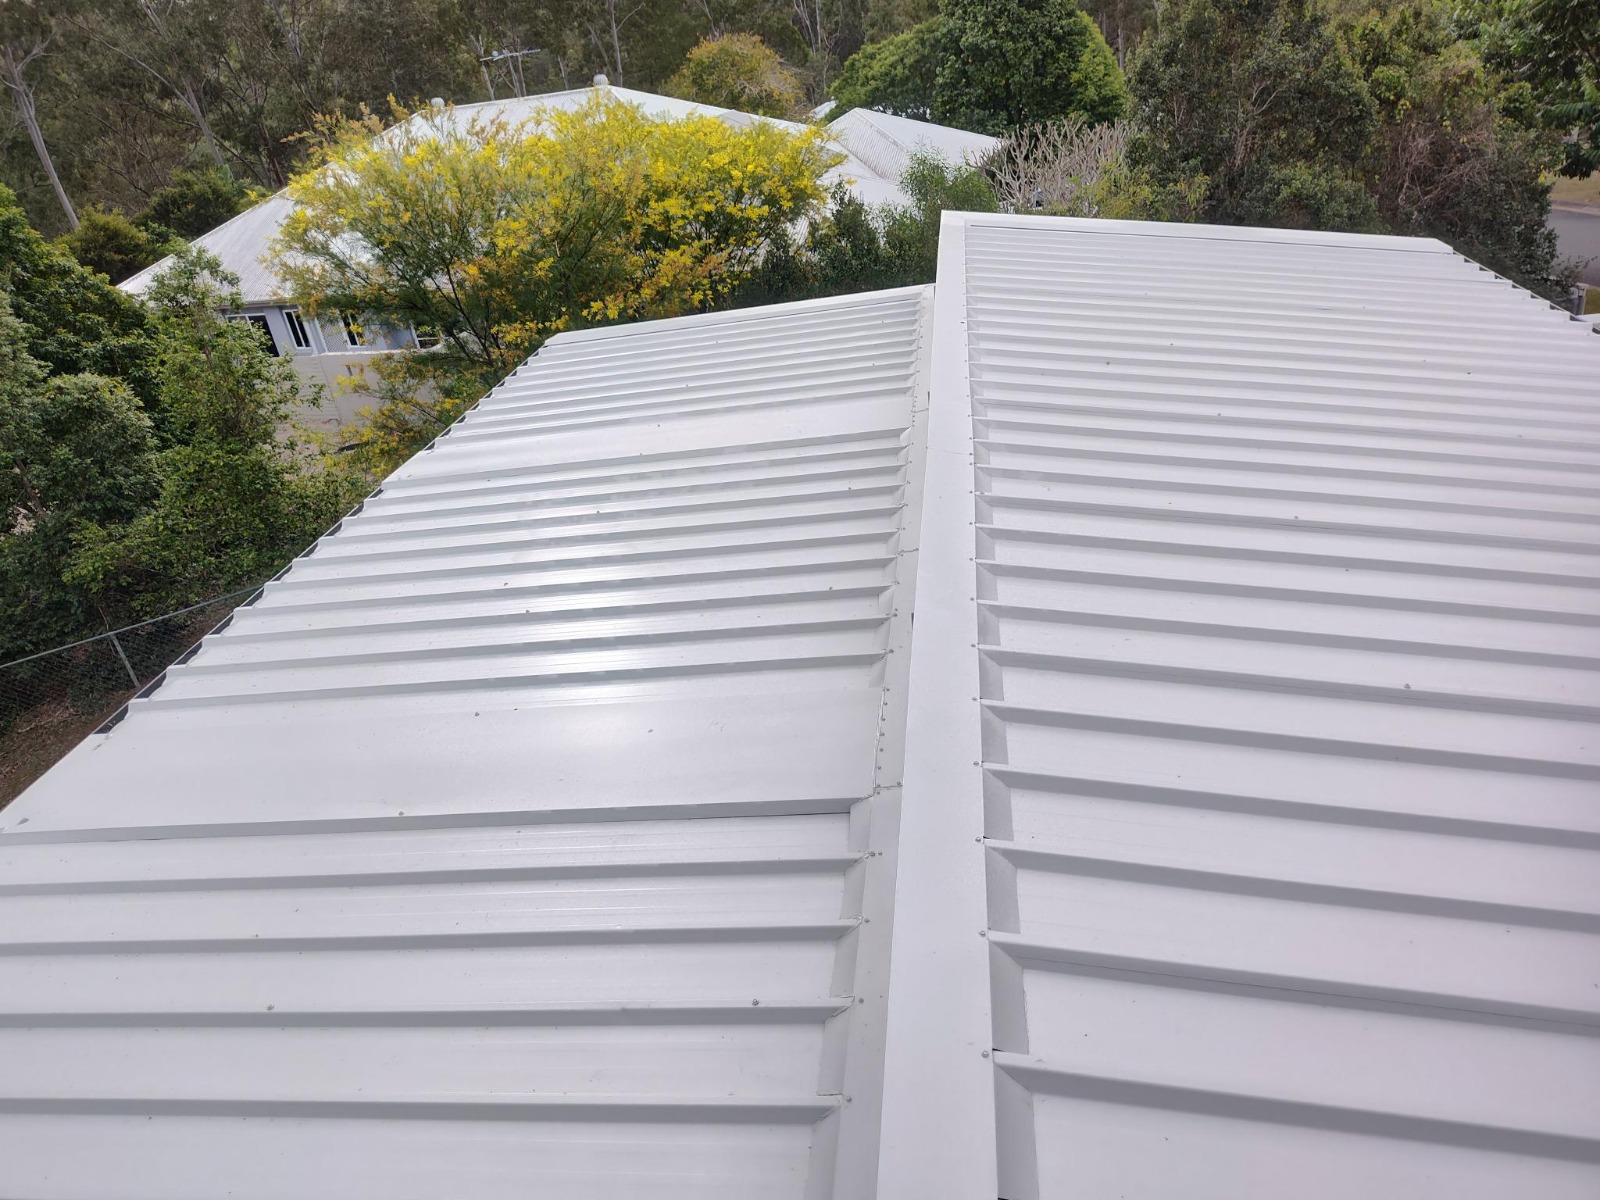 Heat Reflective Roof Paint: Everything You Need to Know